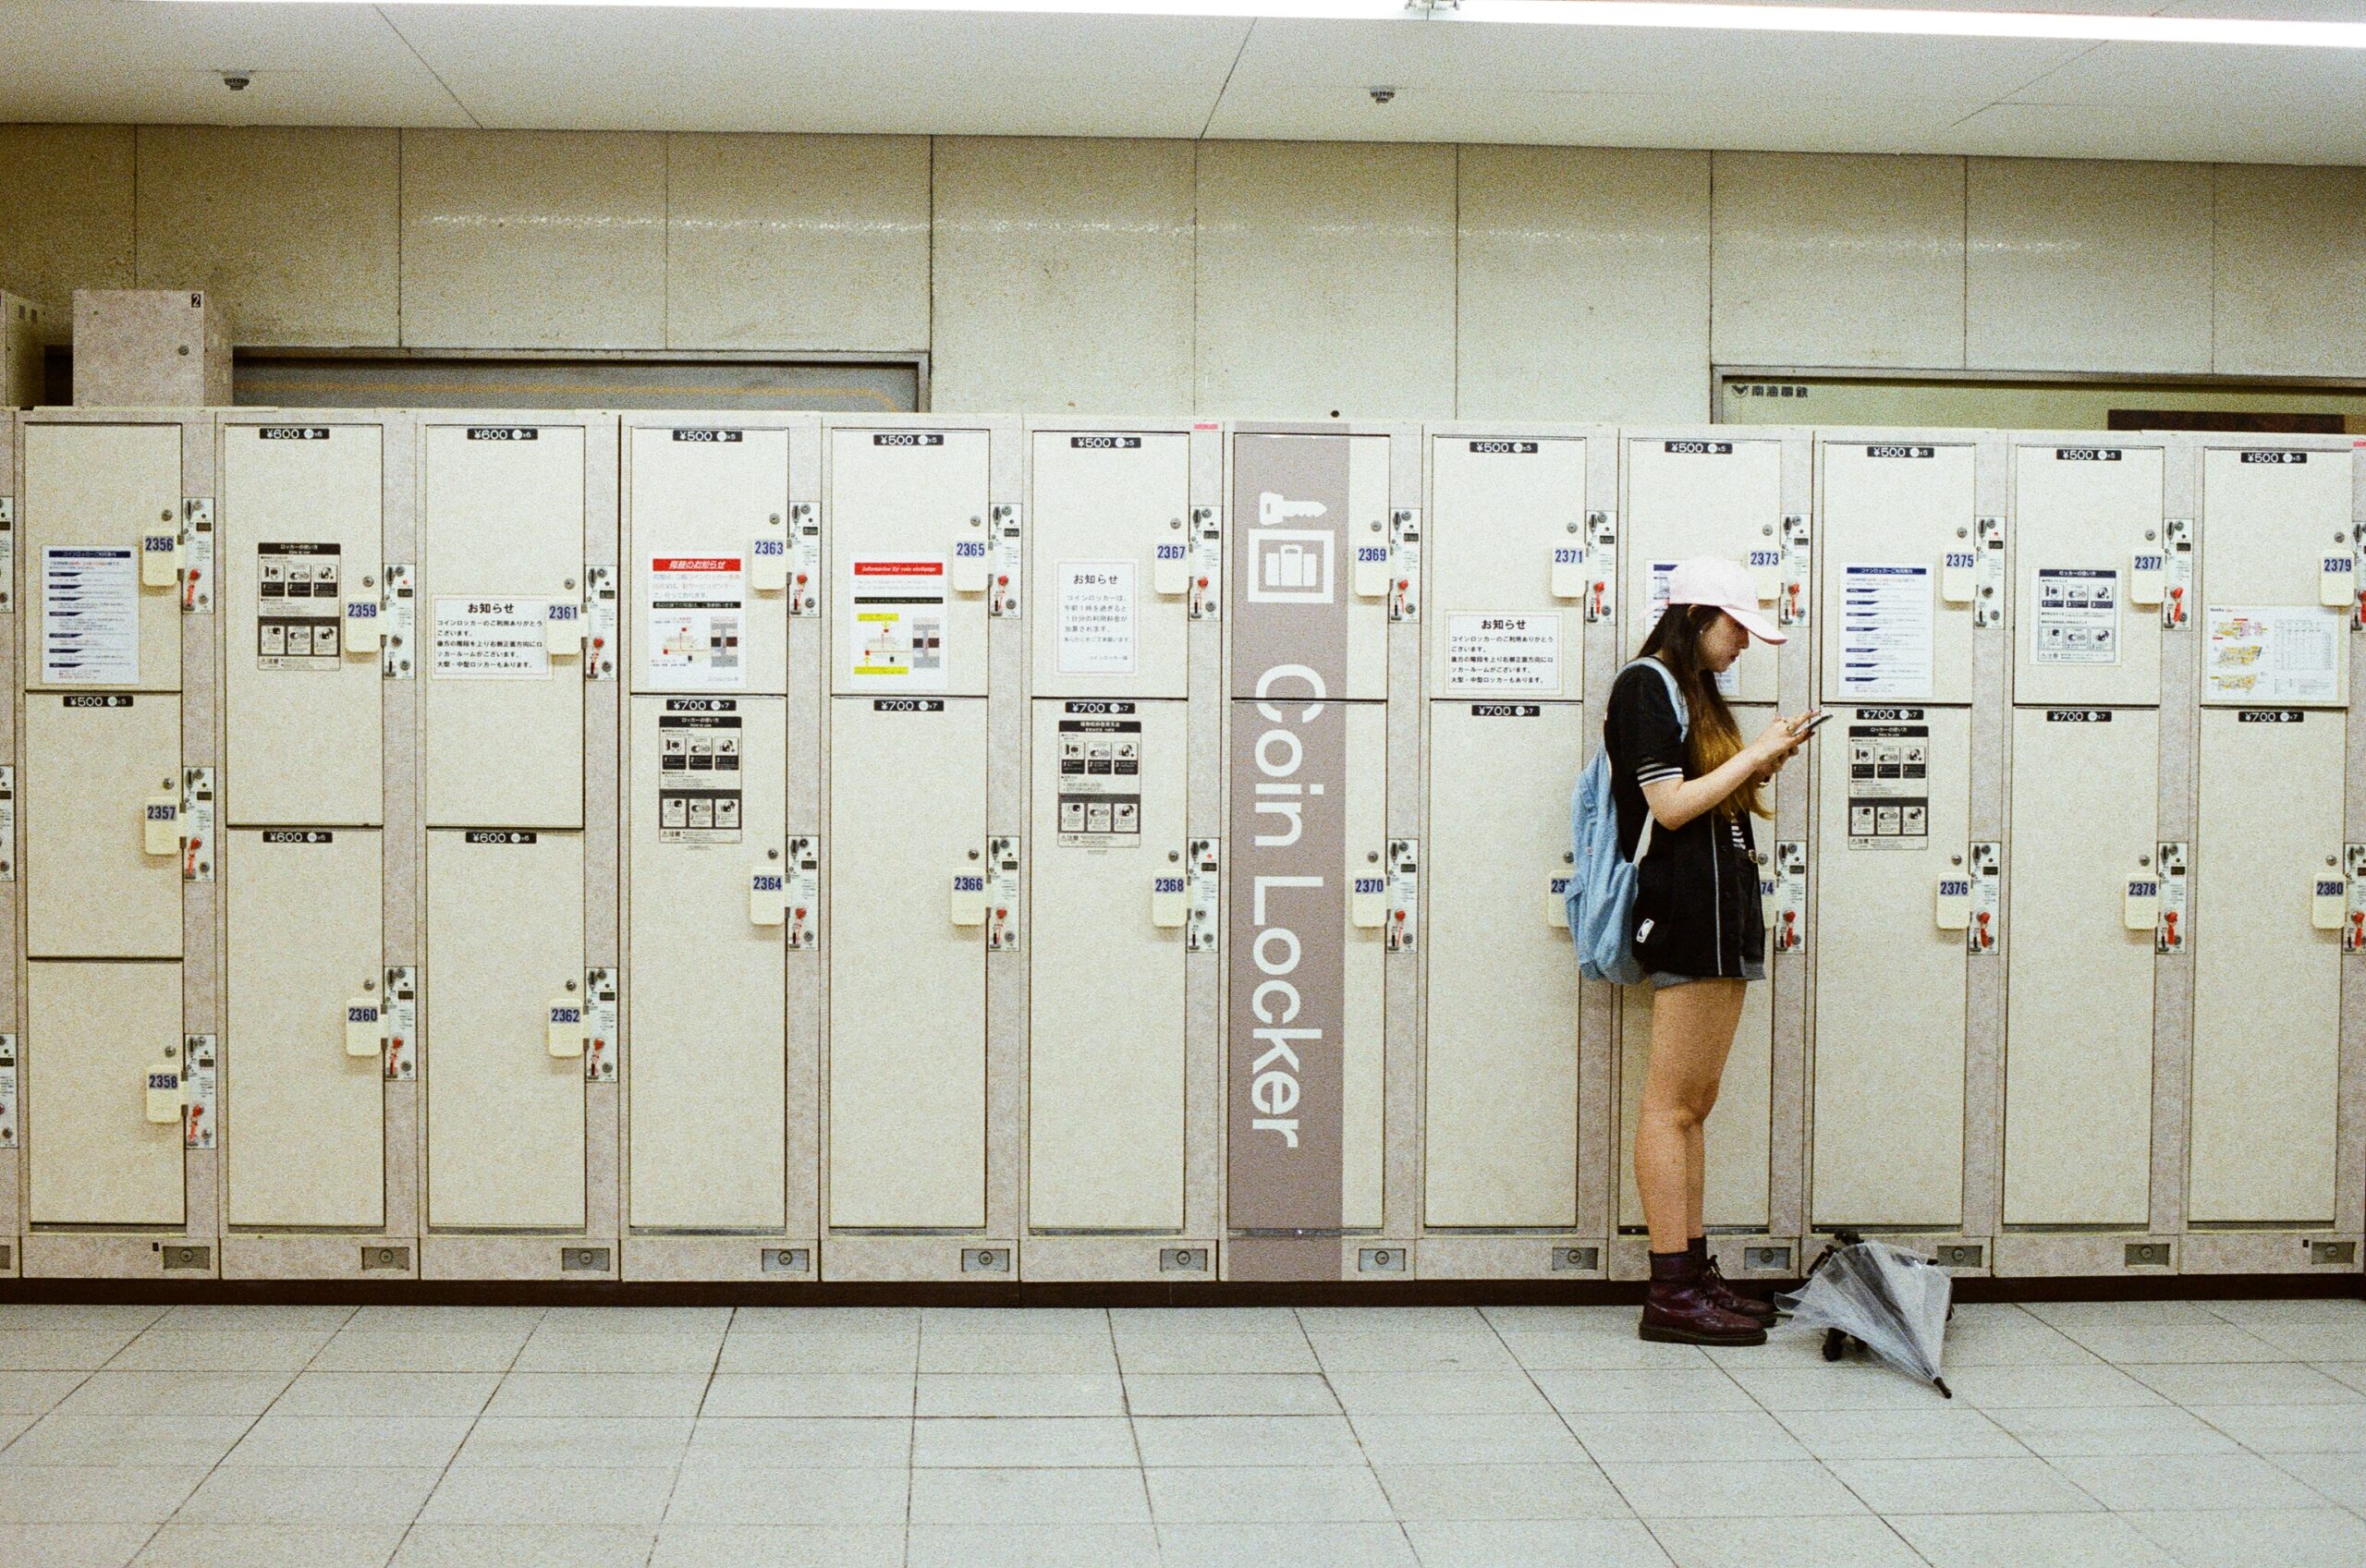 Travelling with luggage in Japan: Using coin lockers